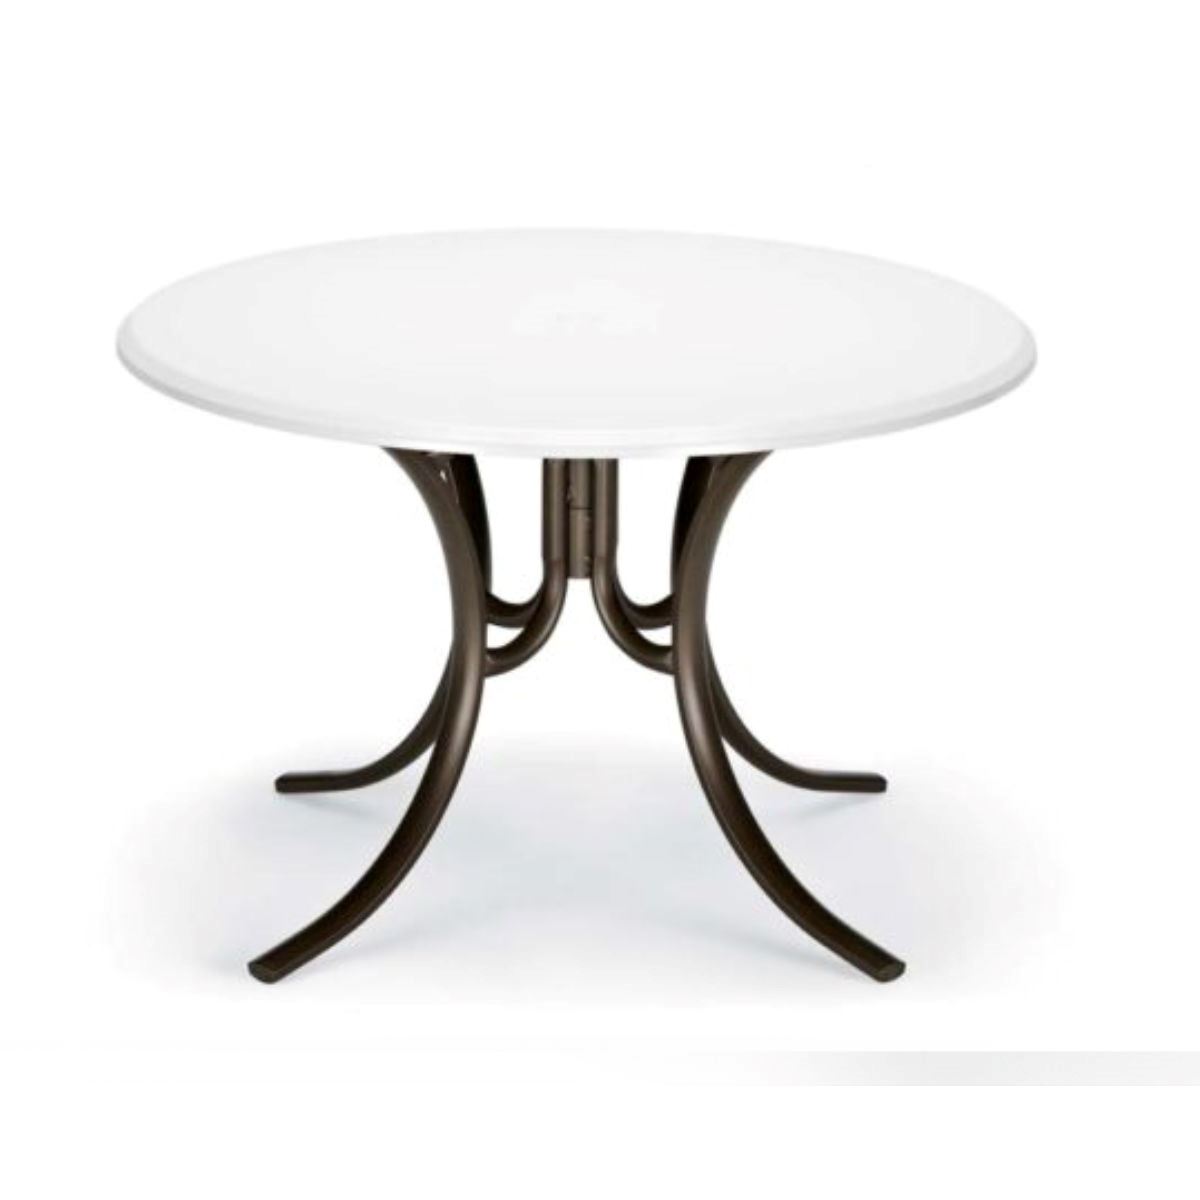 Dining Table 48 Inch Round Werzalit, 48 Inch Round Kitchen Table And Chairs